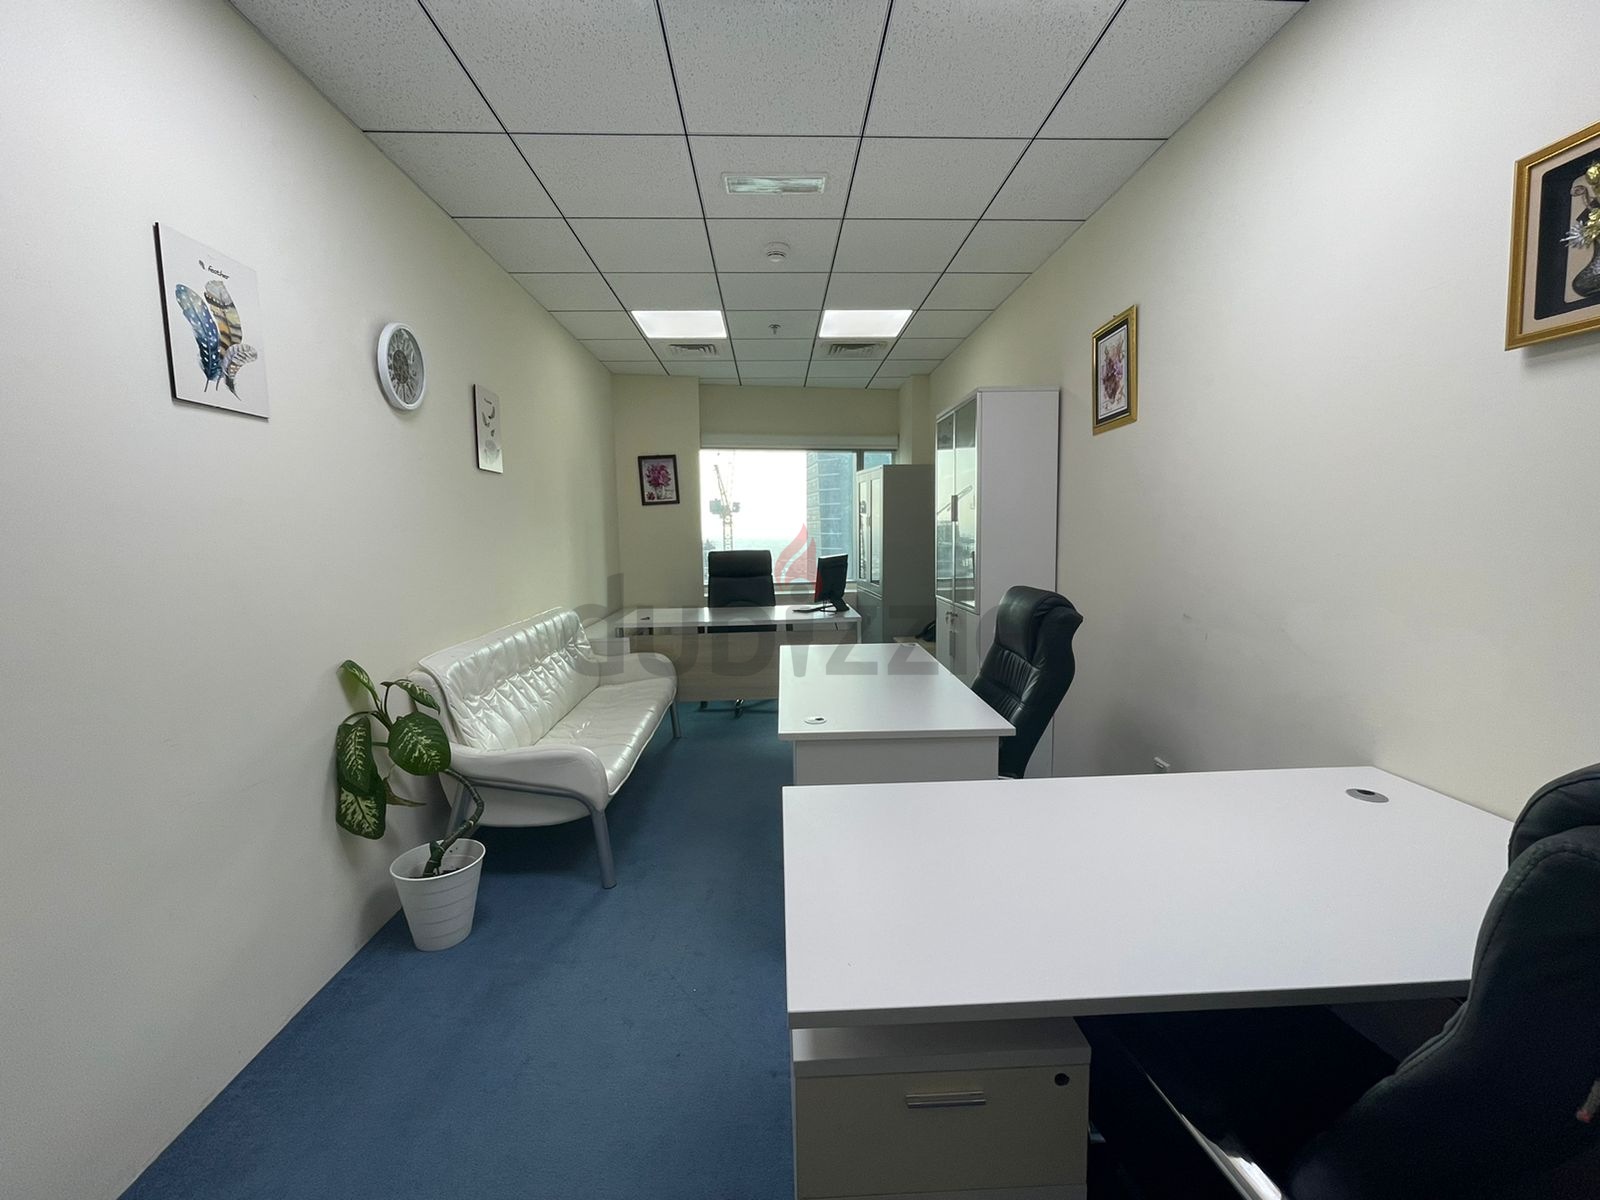 Bank Inspection Office For Freezone License Company| Fully Furnished Office For Inspection | Compan